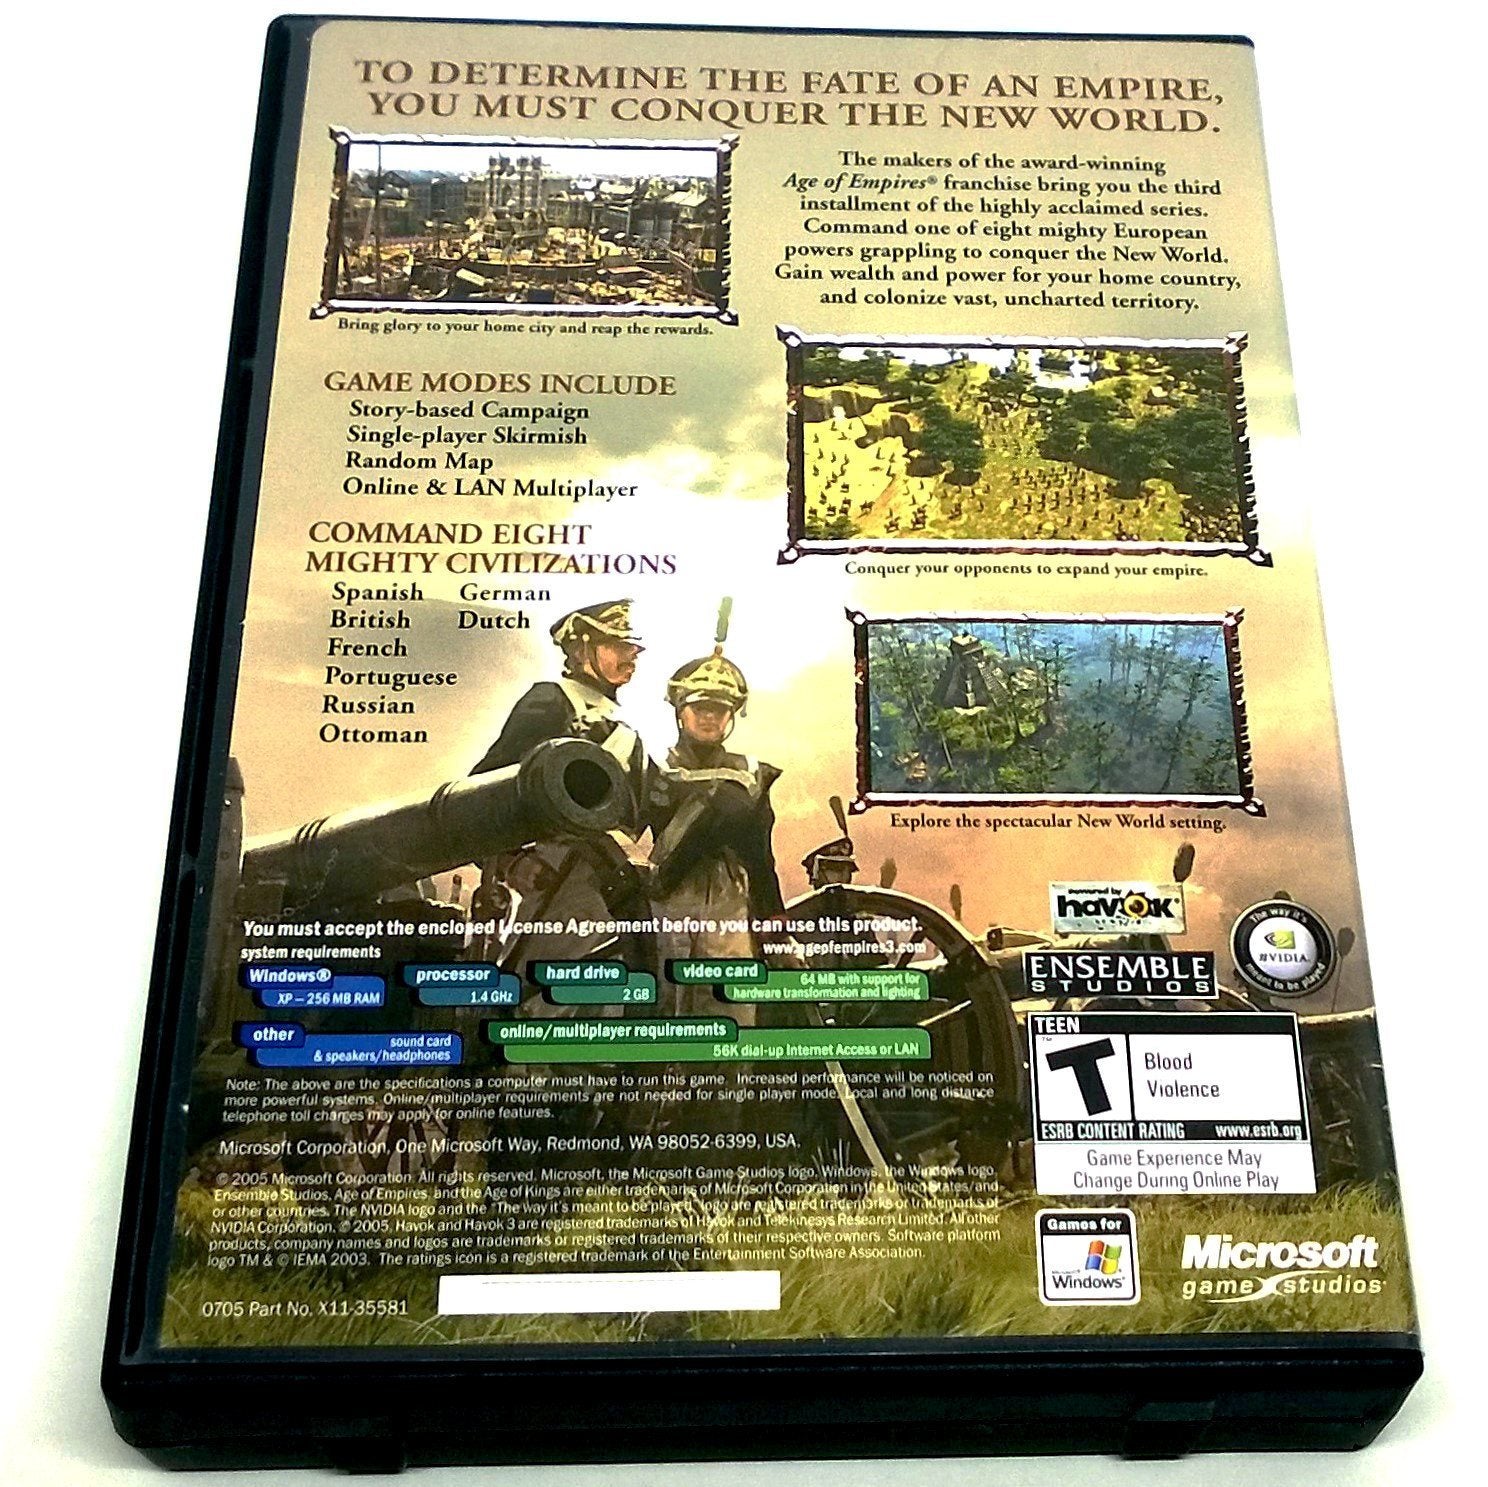 Age of Empires III for PC CD-ROM - Back of case